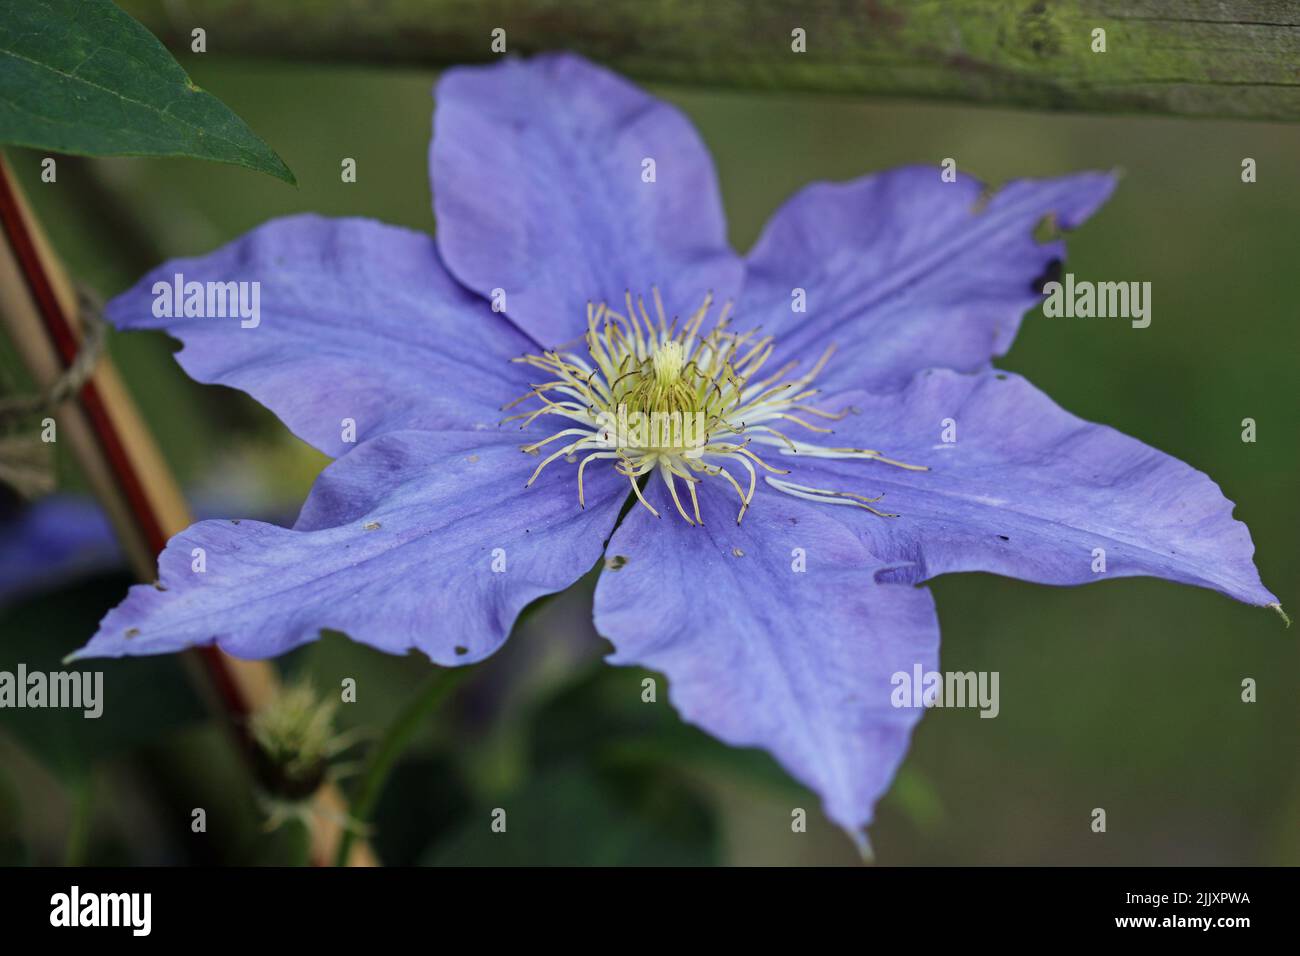 Blue early large flowered Clematis, variety Fujimusume, flower in close up with a background of blurred leaves. Stock Photo